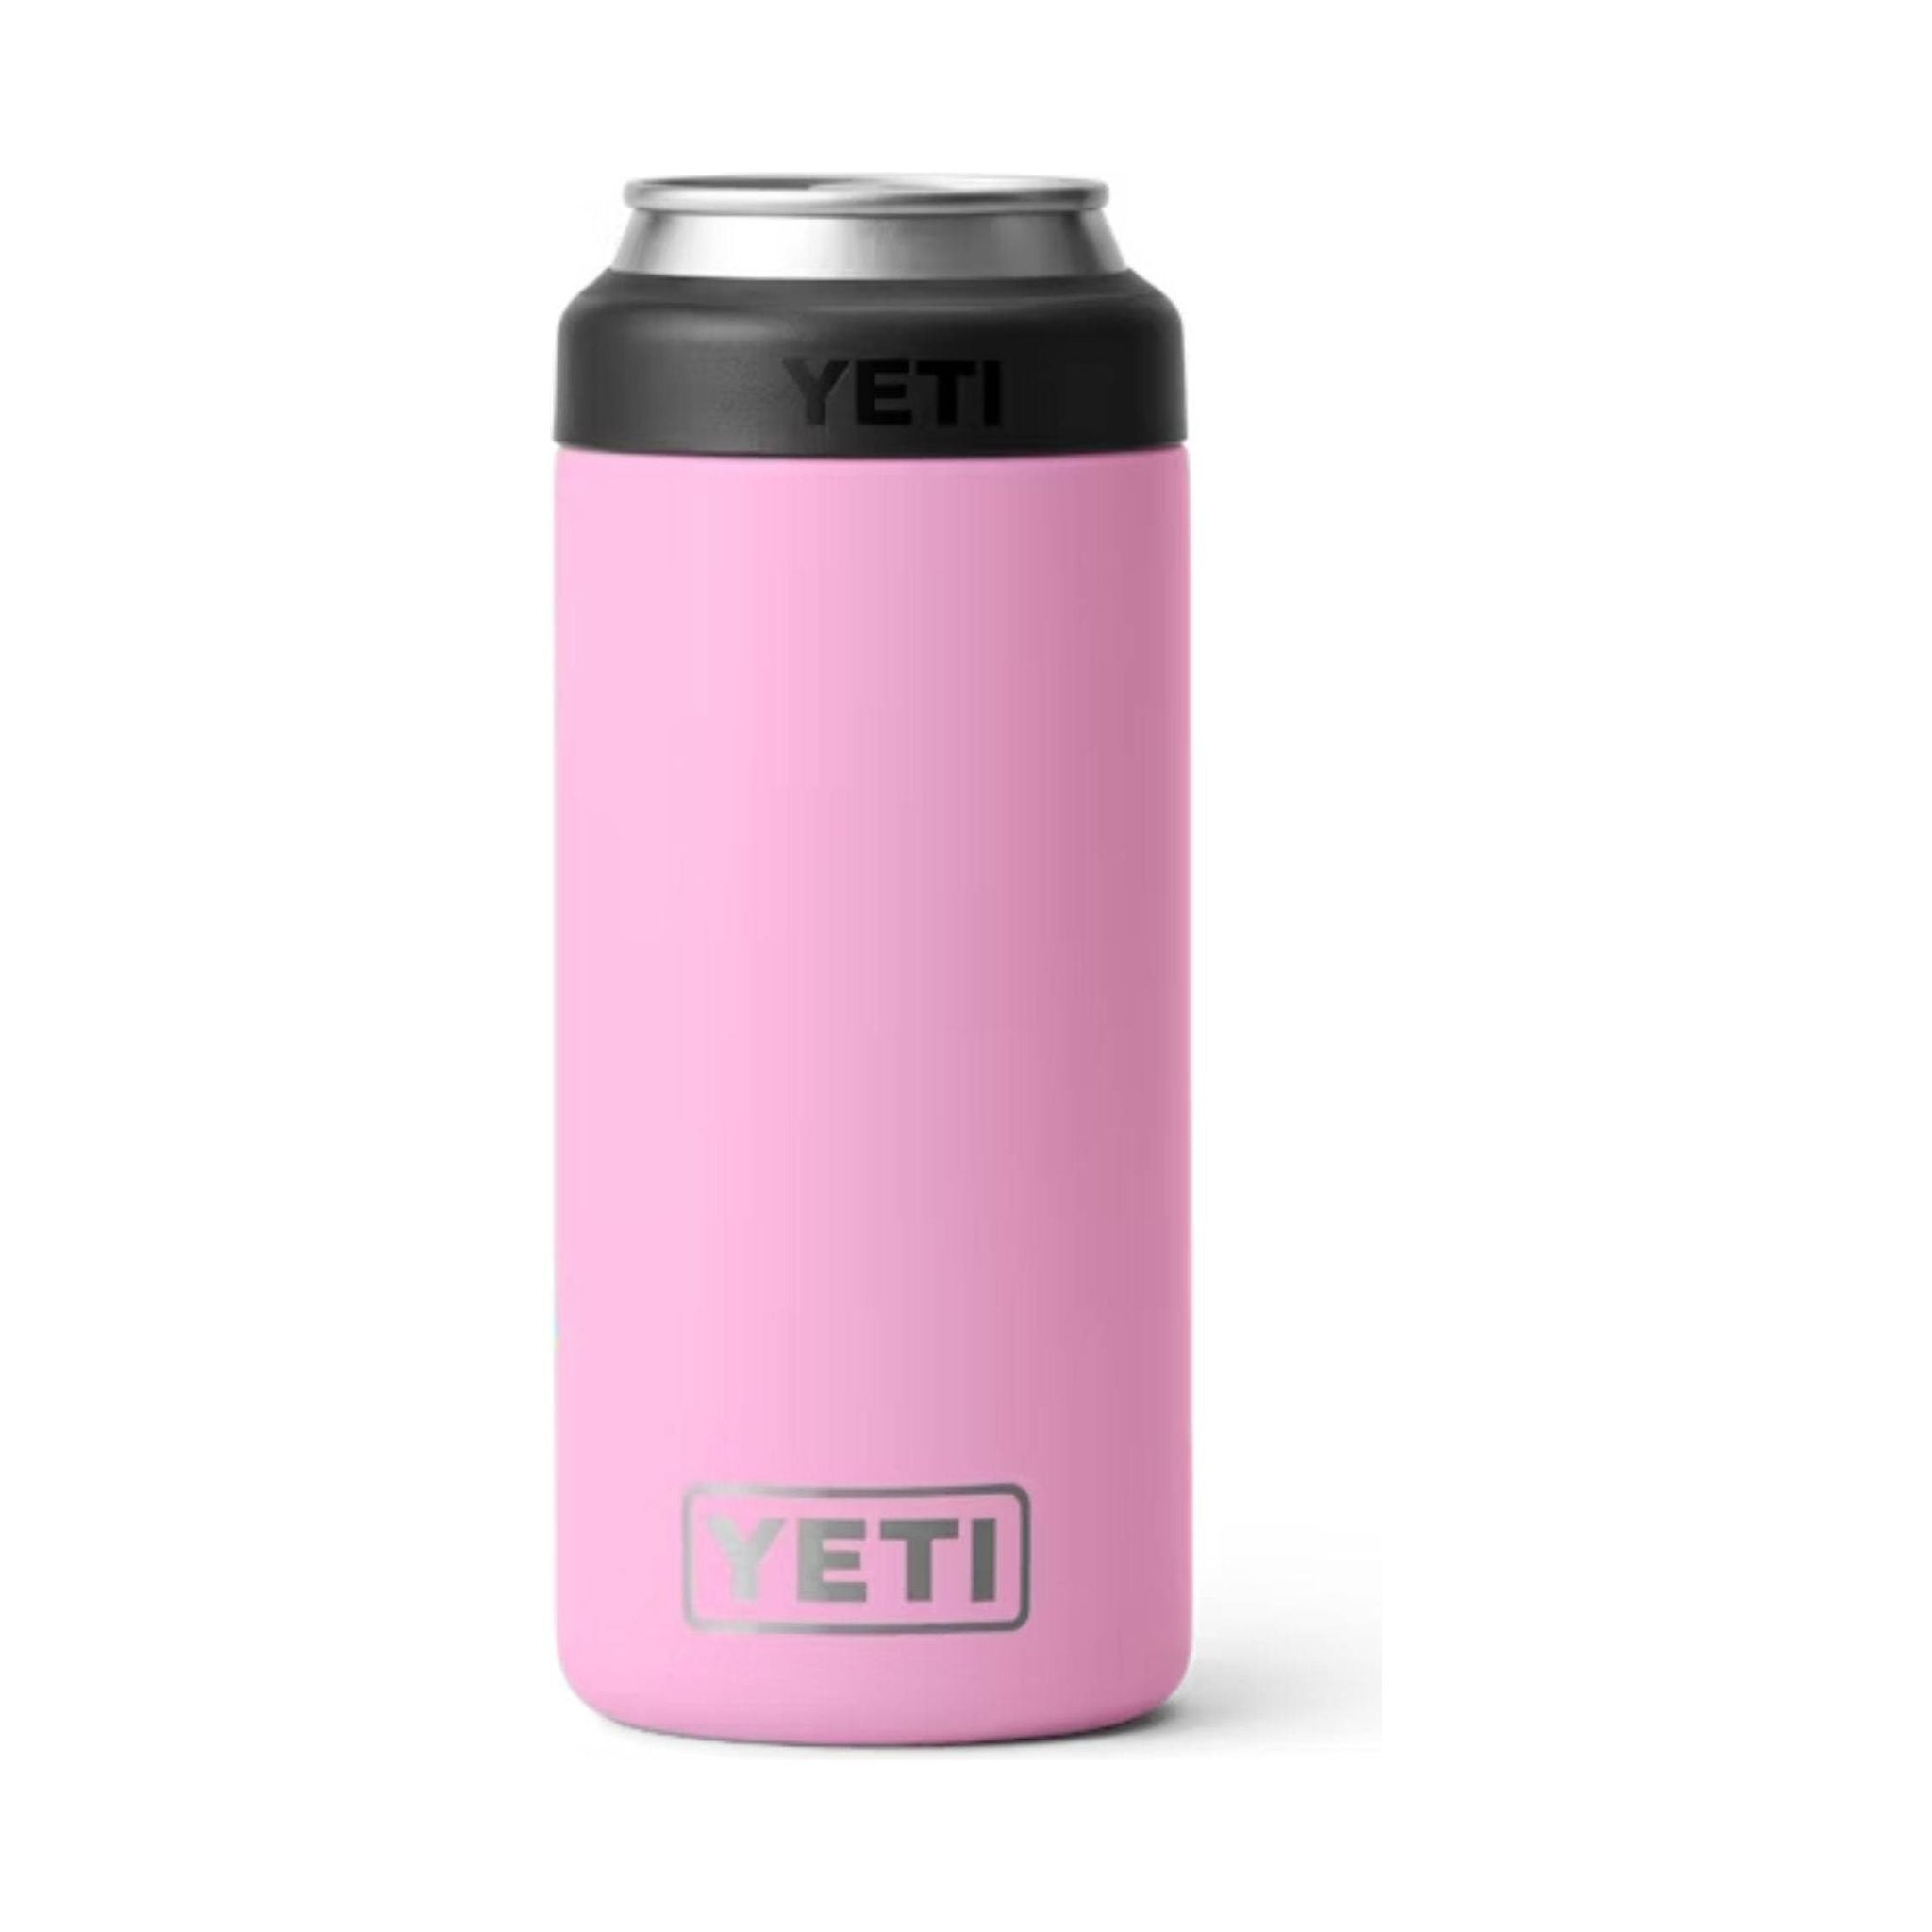 YETI Rambler 12 oz Colster Slim Can Cooler - Power Pink (Limited Edition)